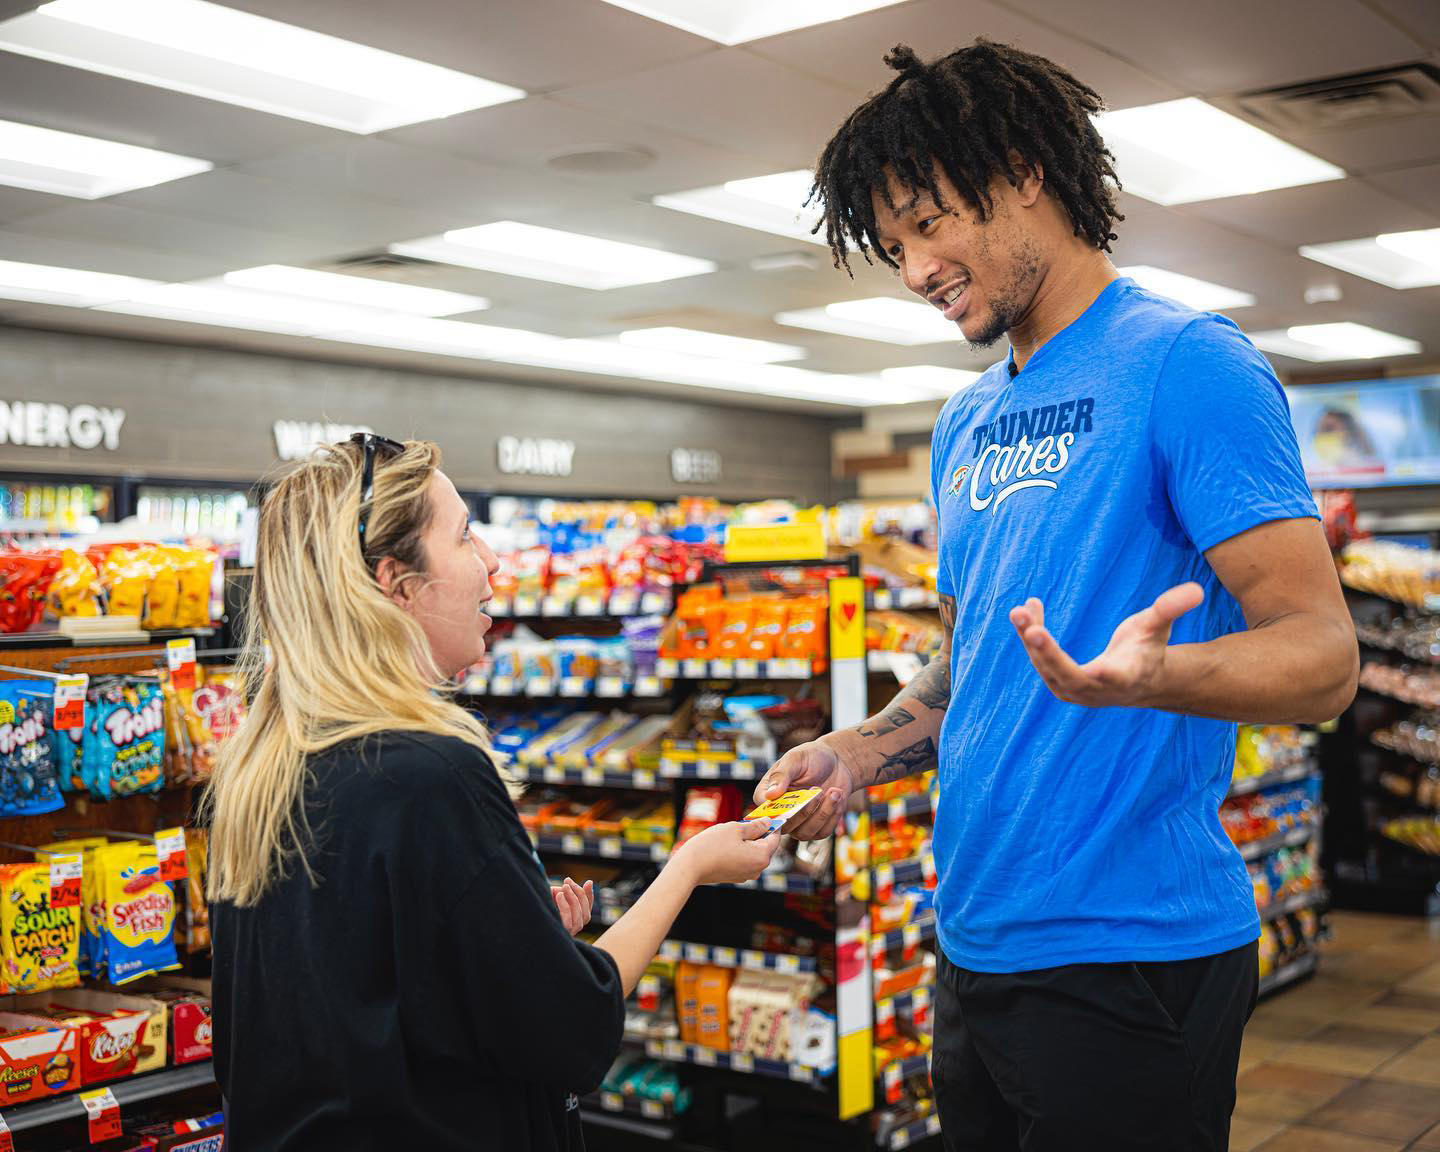 Oklahoma City Thunder - Giving back is what we love to do